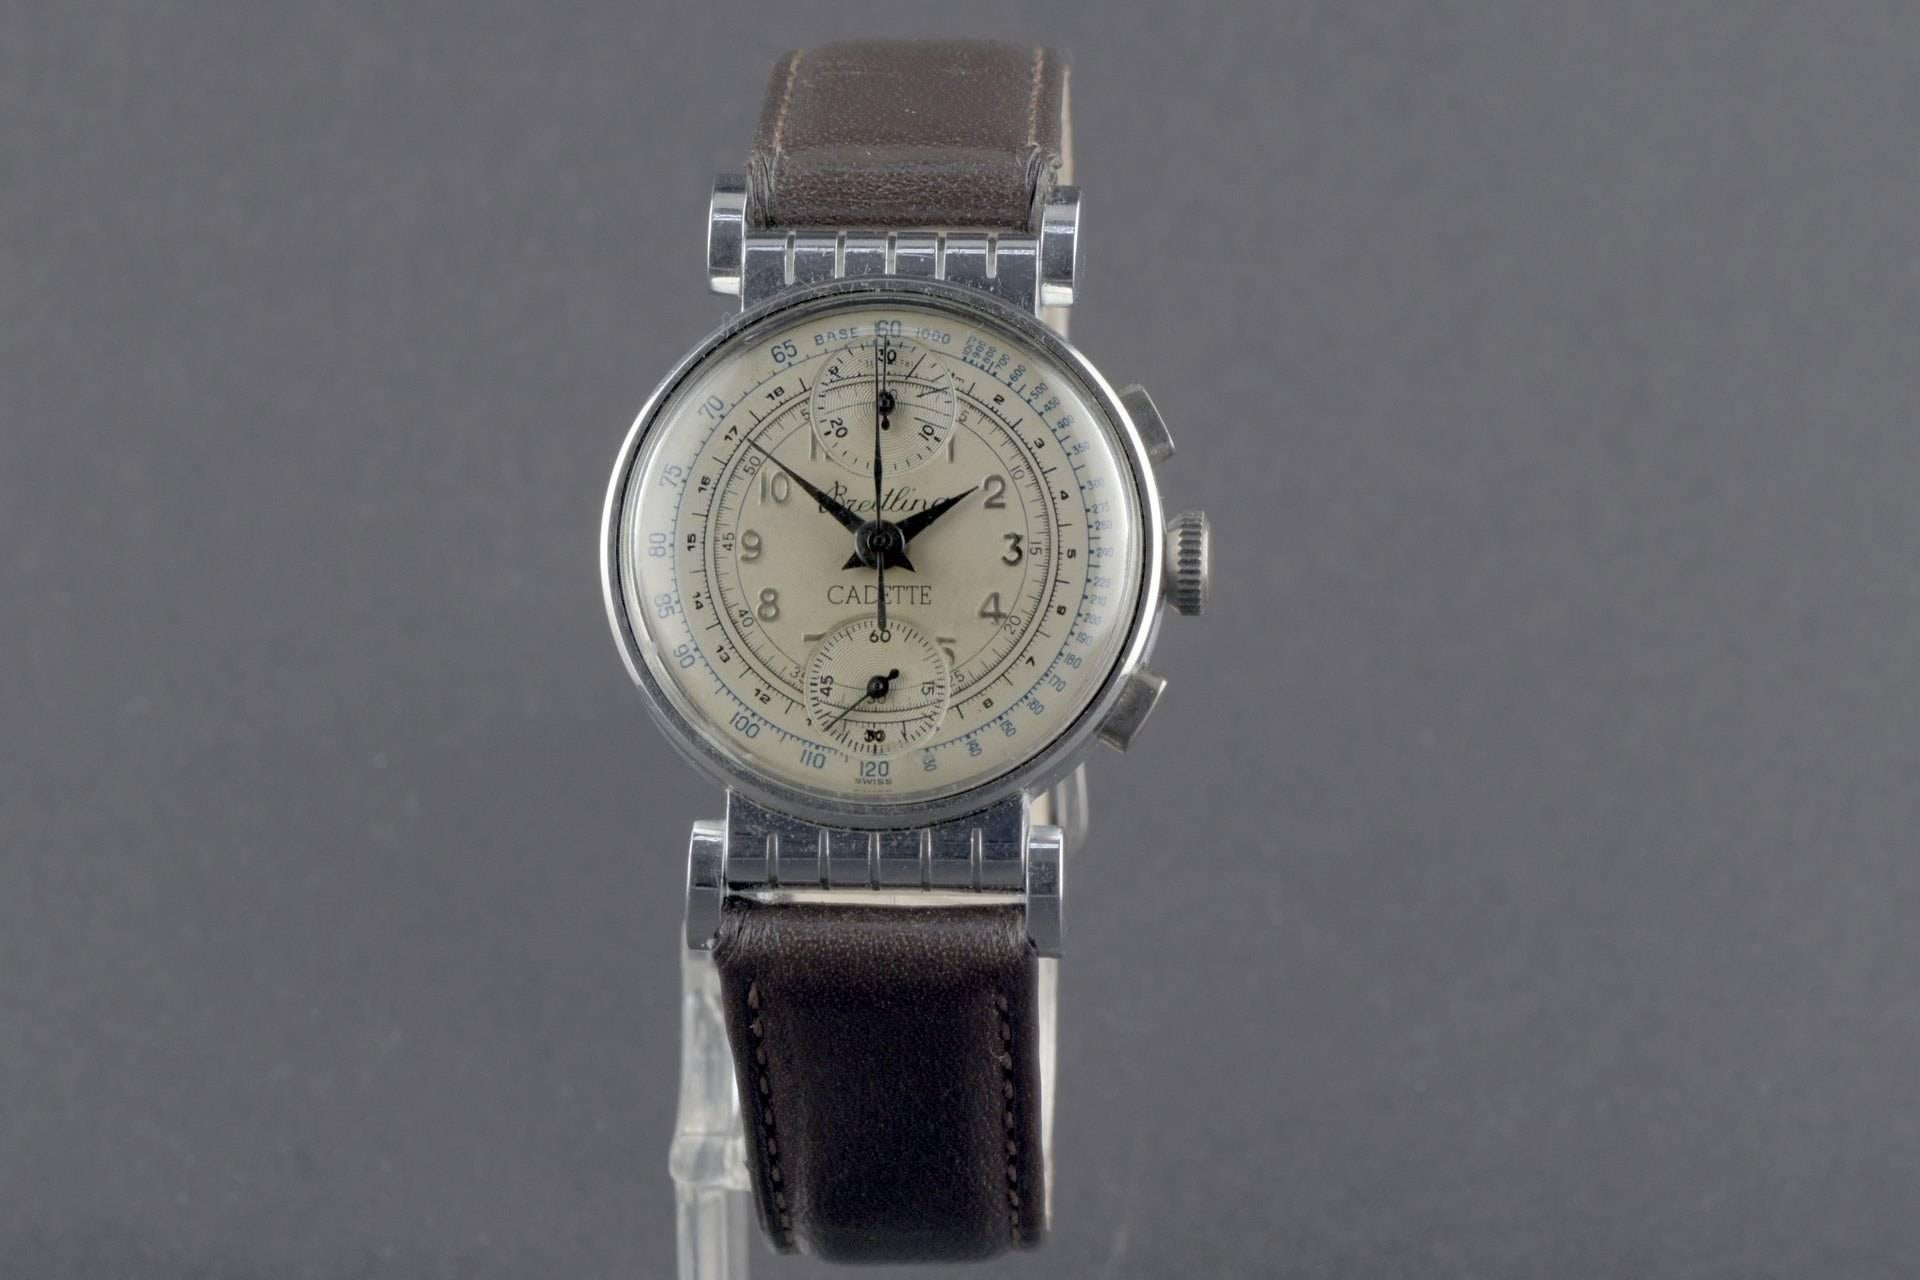 This chronograph, Breitling Cadette, has been marvelously preserved with mobile strap lugs. Irritant contrasts through polished and matted surfaces are shown on the best preserved case. Also the movement is in wonderful condition, after all, this